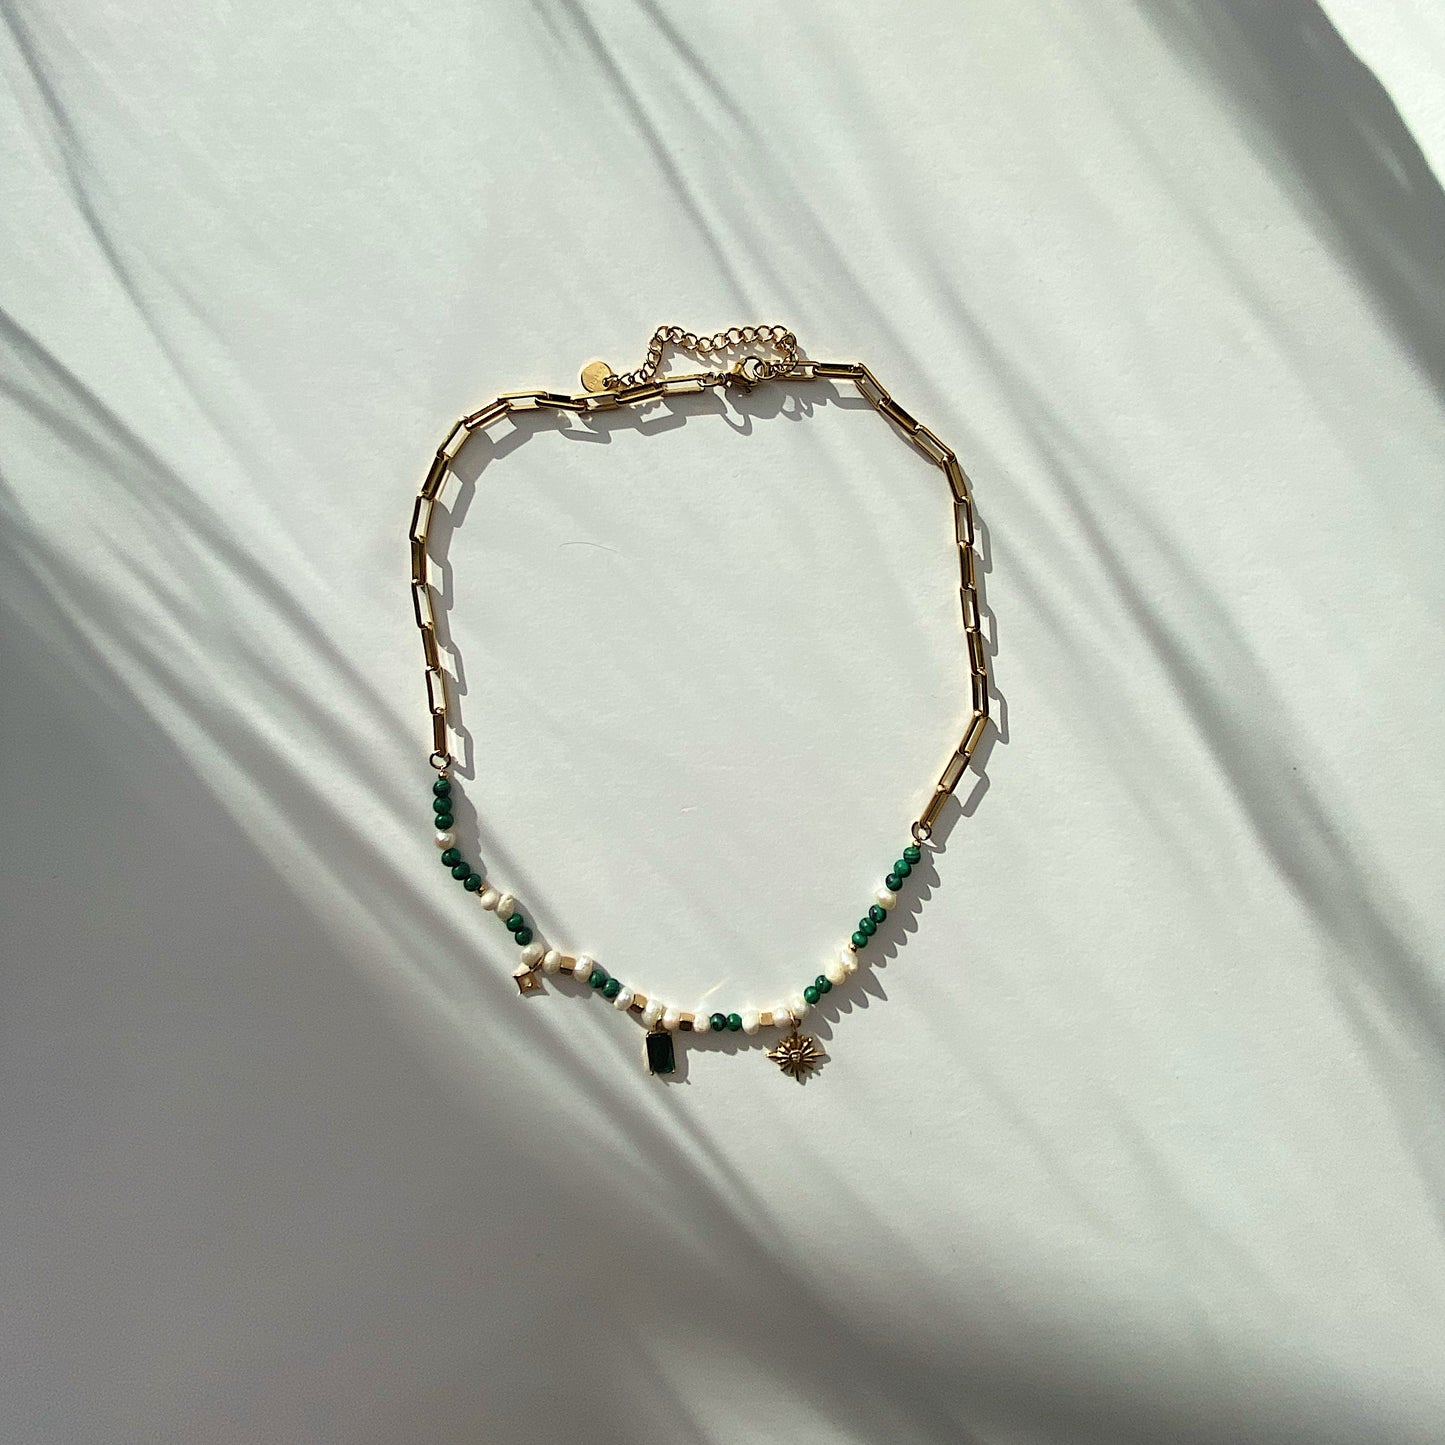 Pearl and Malachite Beaded Necklace with Emerald and Sun Pendants